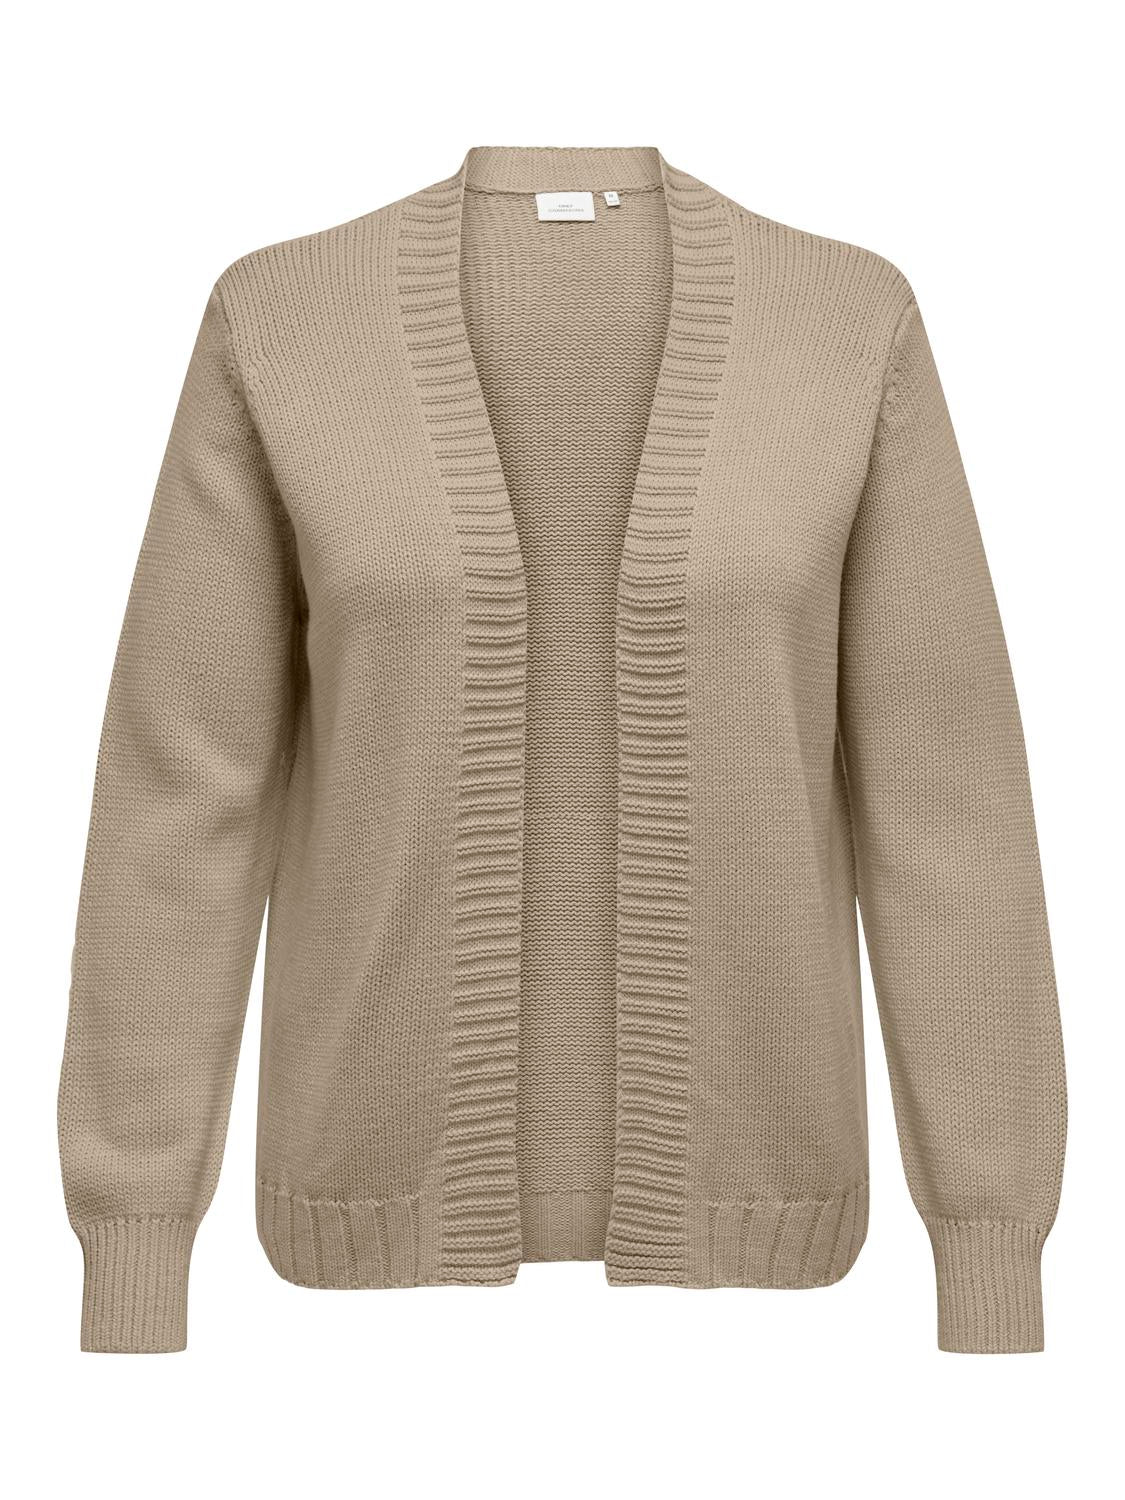 Only Carmakoma Millie Cardigan in Beige